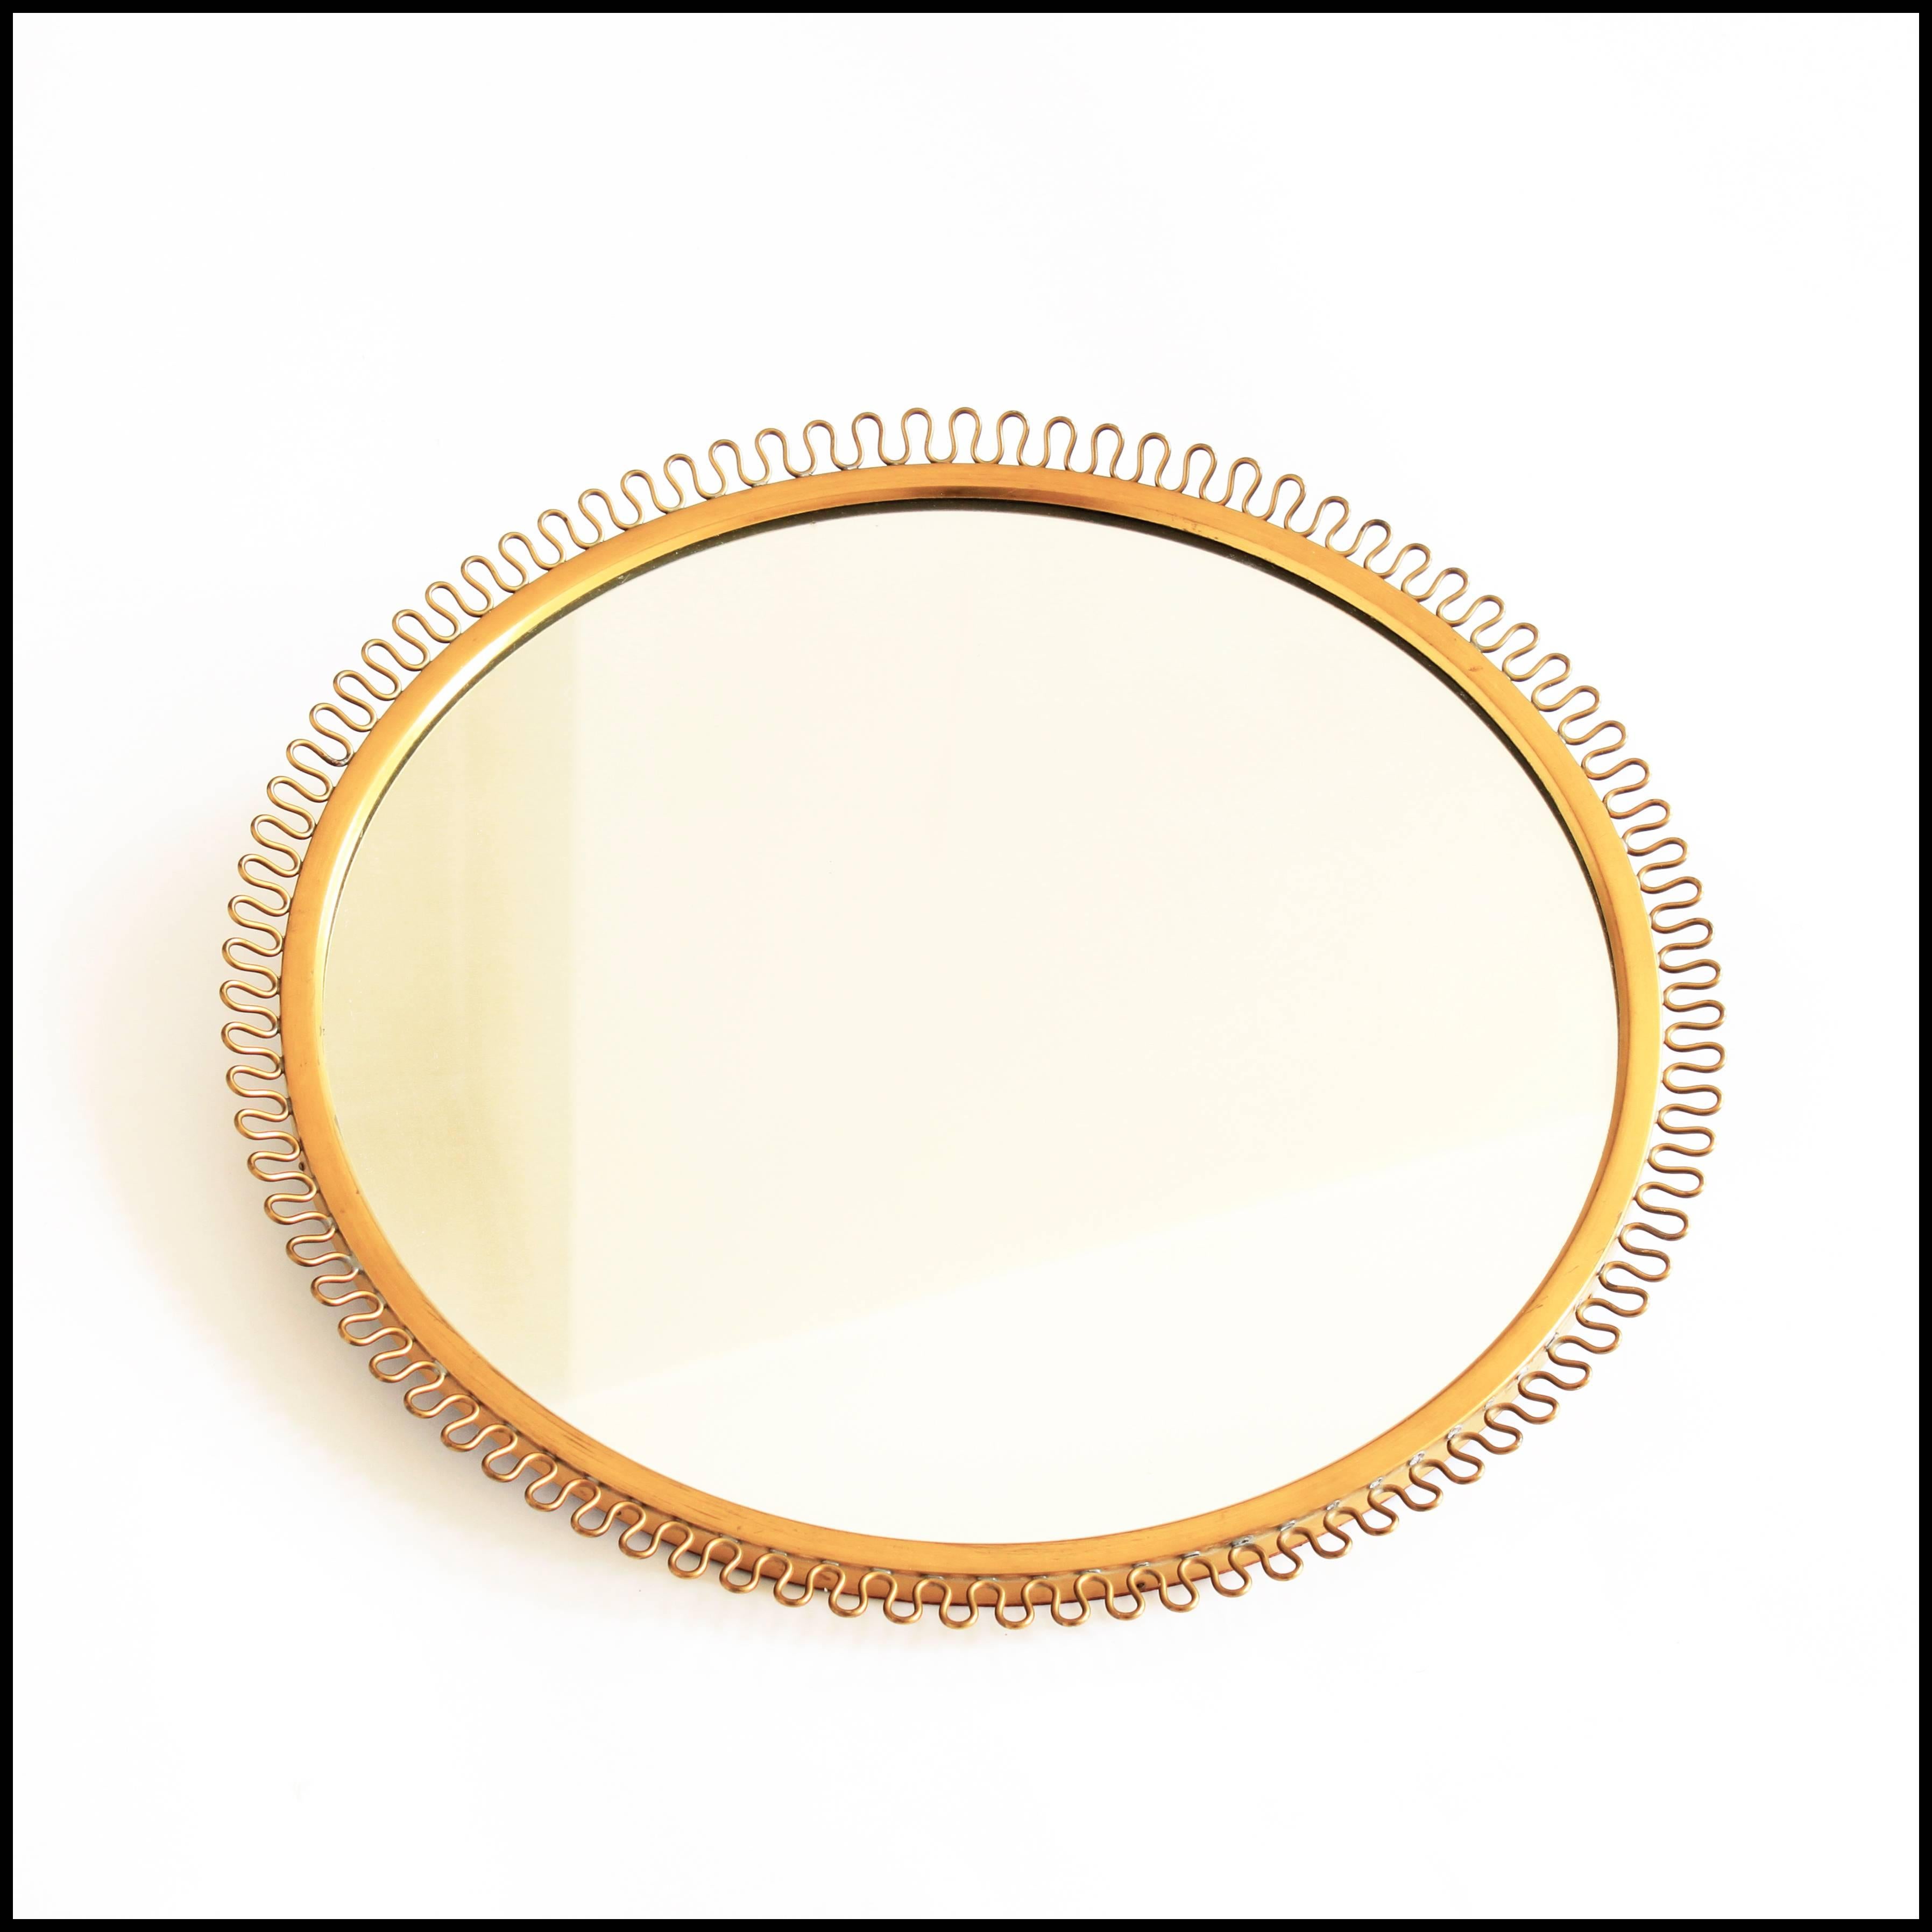 A brass wall mirror with a decorative corona edge, designed in Sweden by Josef Frank for Svenskt Tenn in the 1940s.